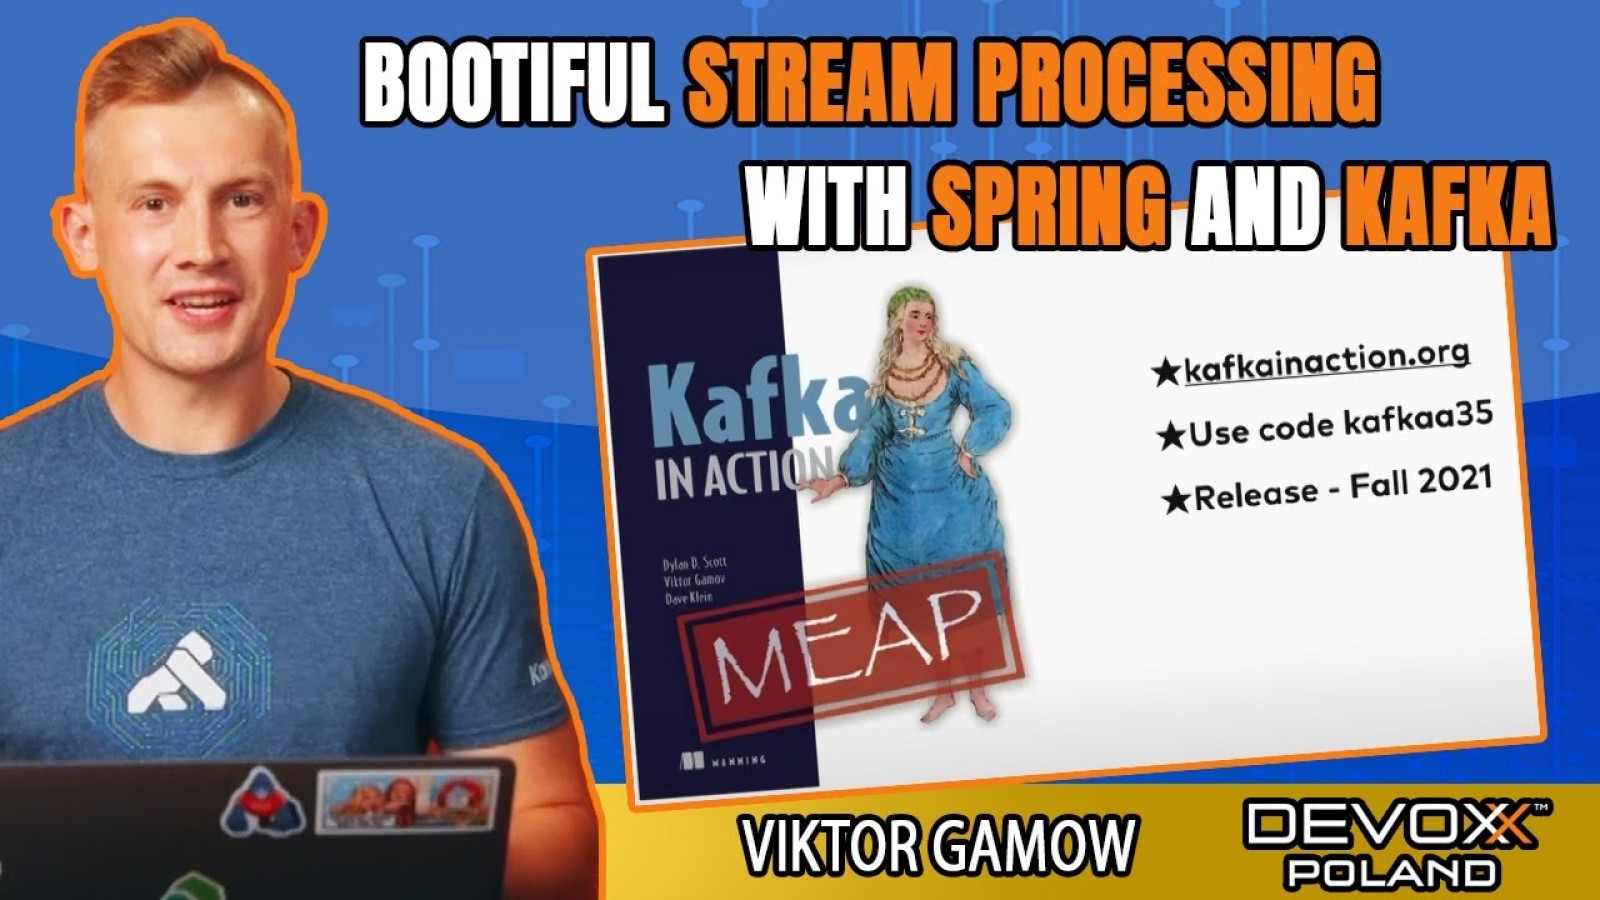 Bootiful Stream Processing with Spring and Kafka